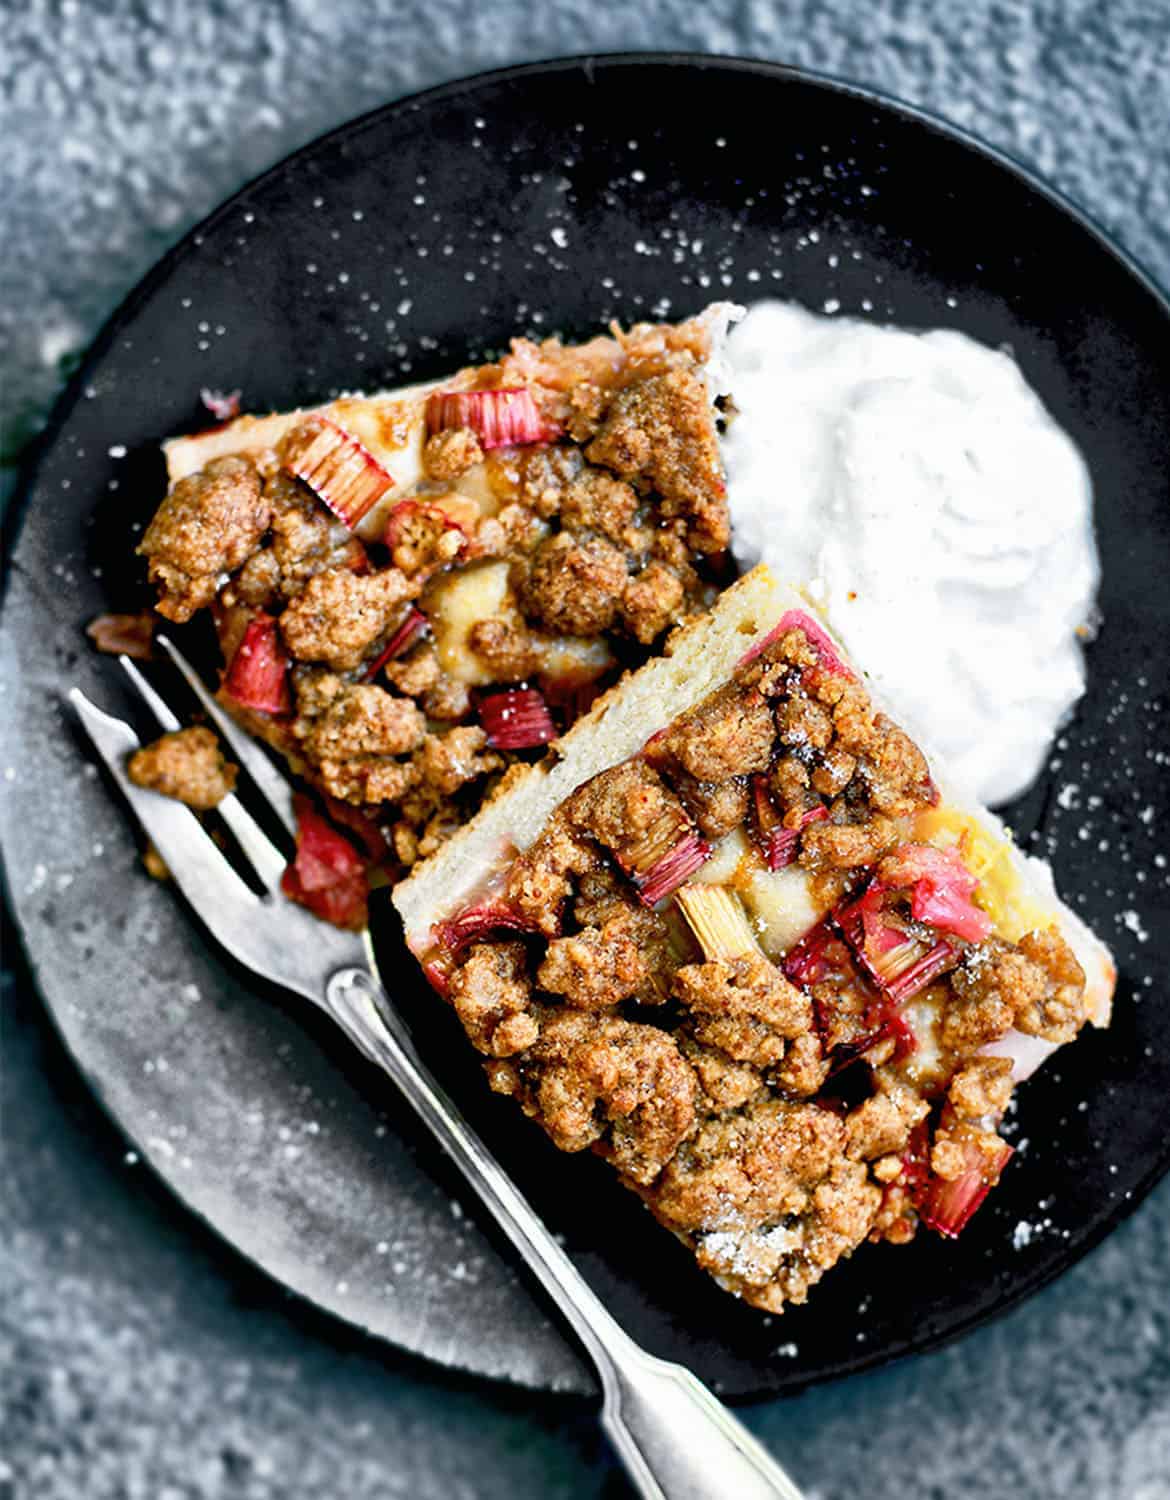 Vegan rhubarb streusel cake on a black plate with a fork - Occasionally Eggs